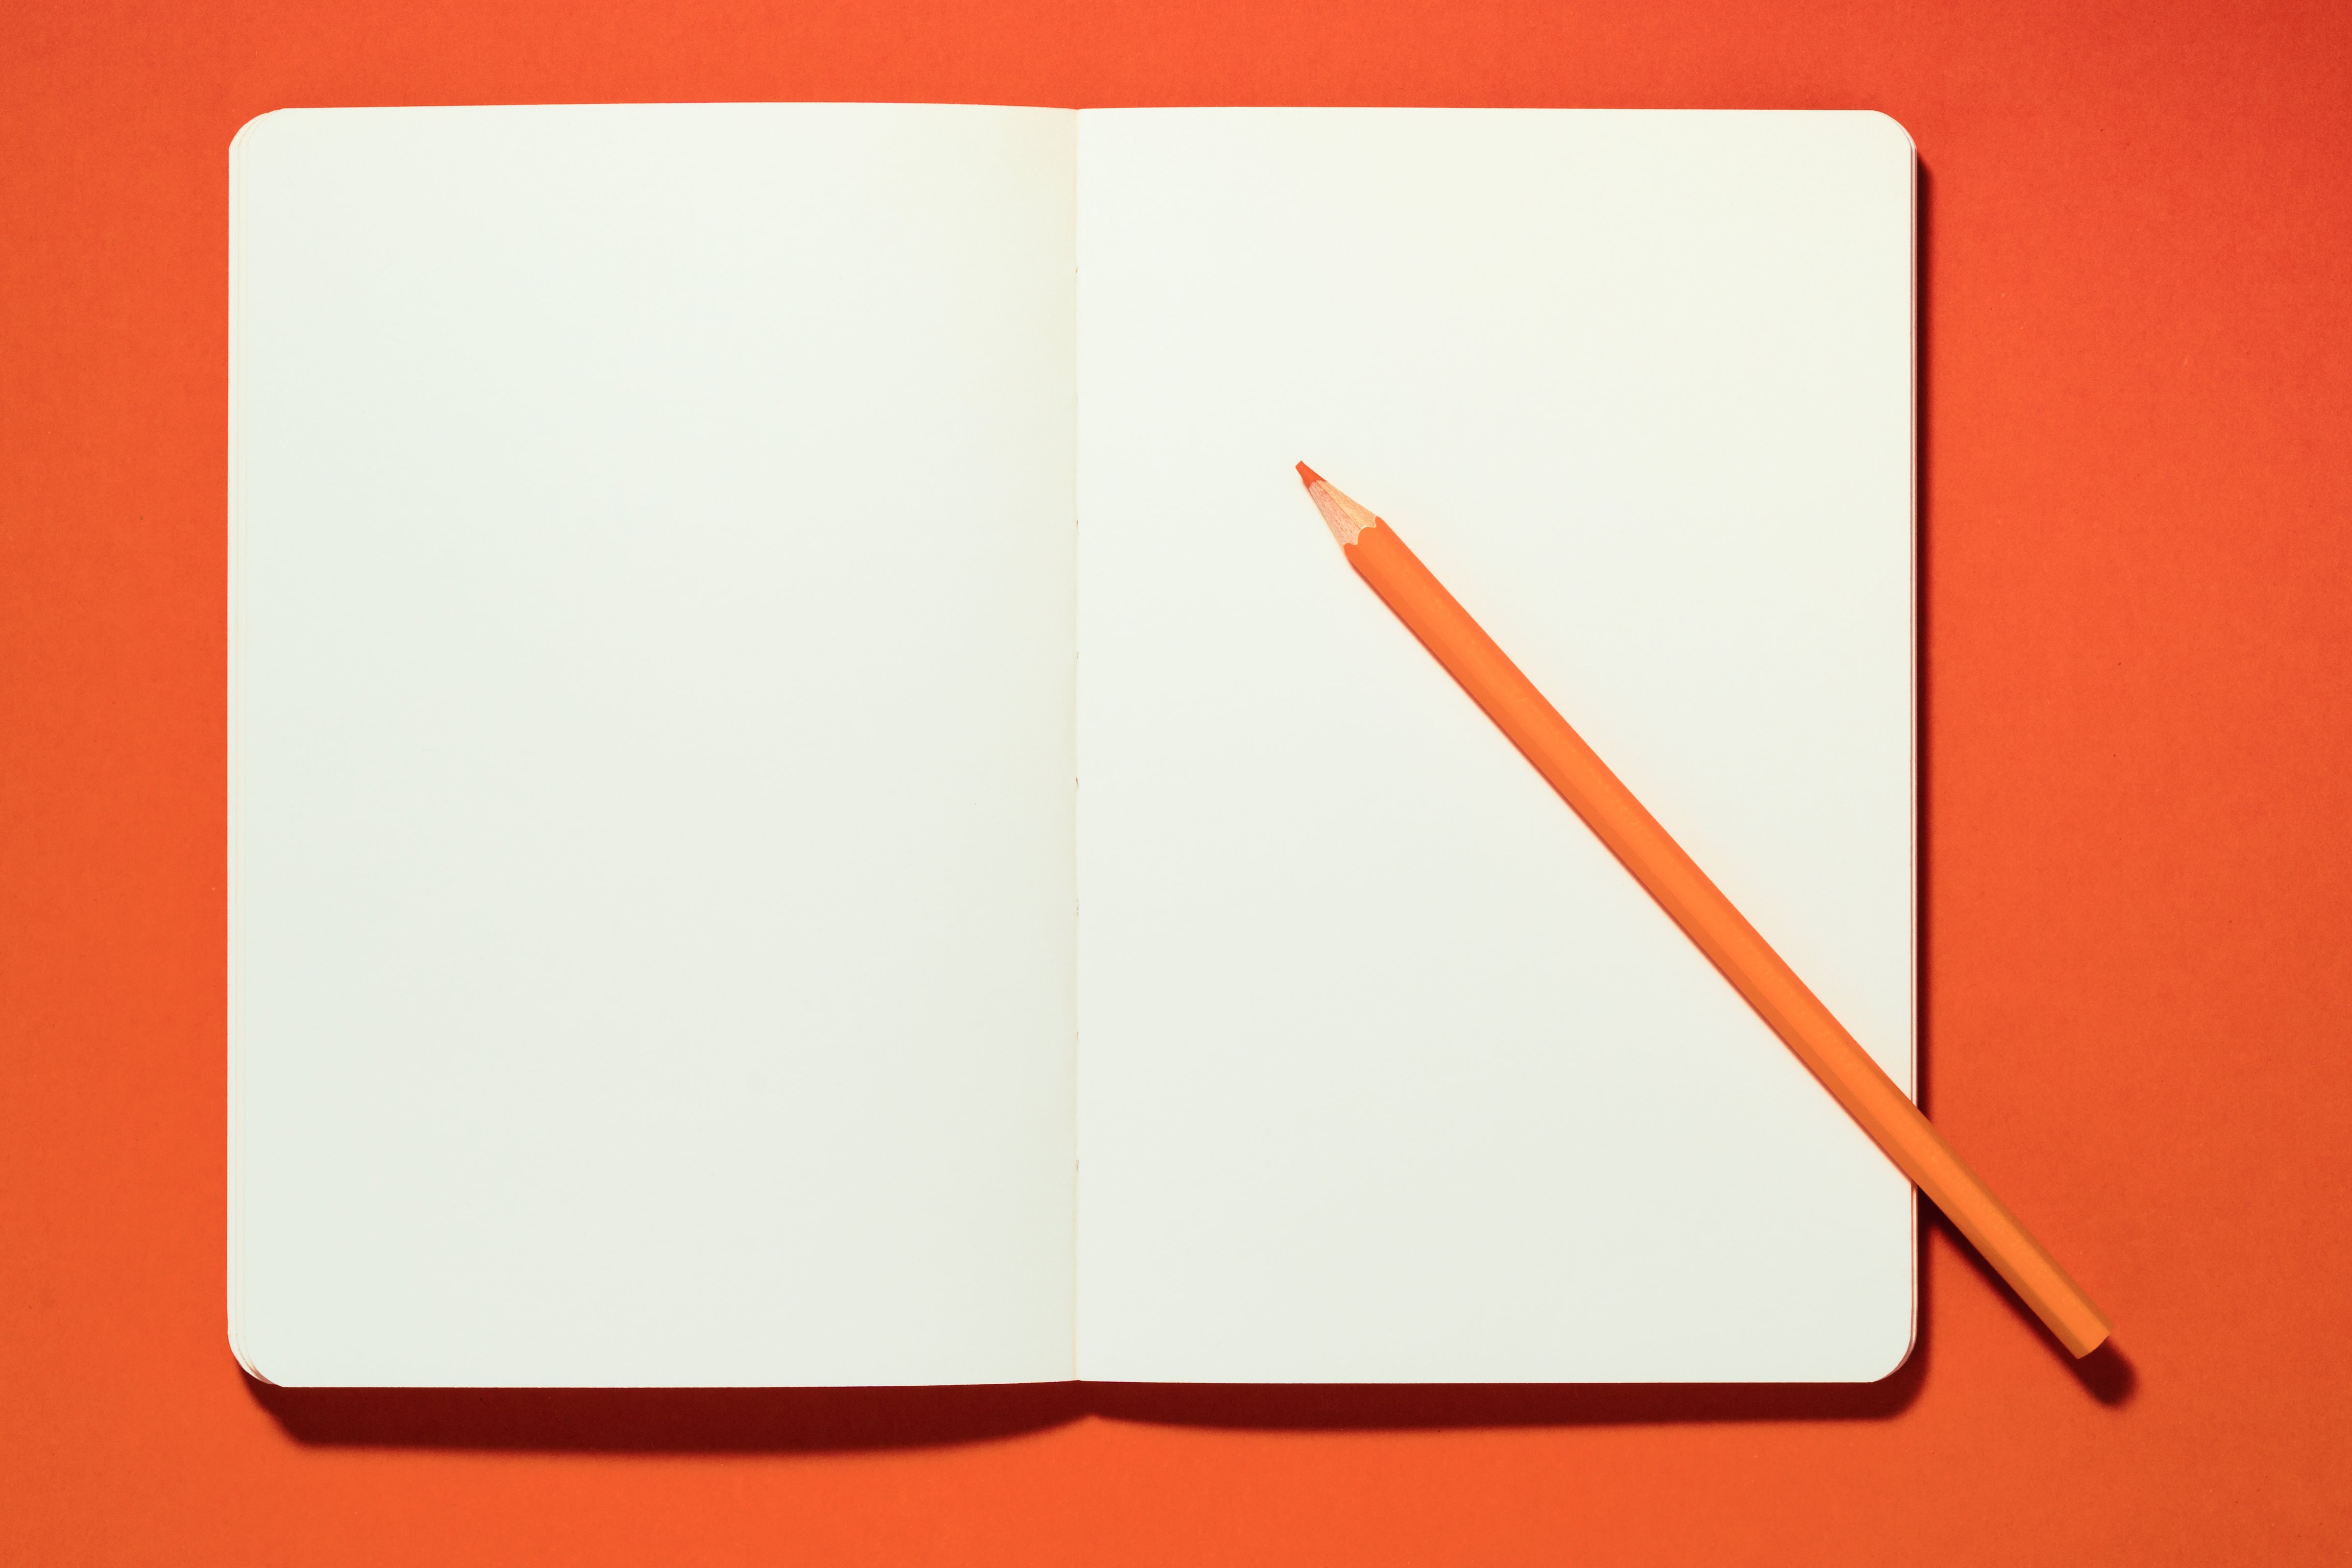 Orange Pencil on a Opened Blank Notebook against Orange Color Background Overhead View. (Getty Images)